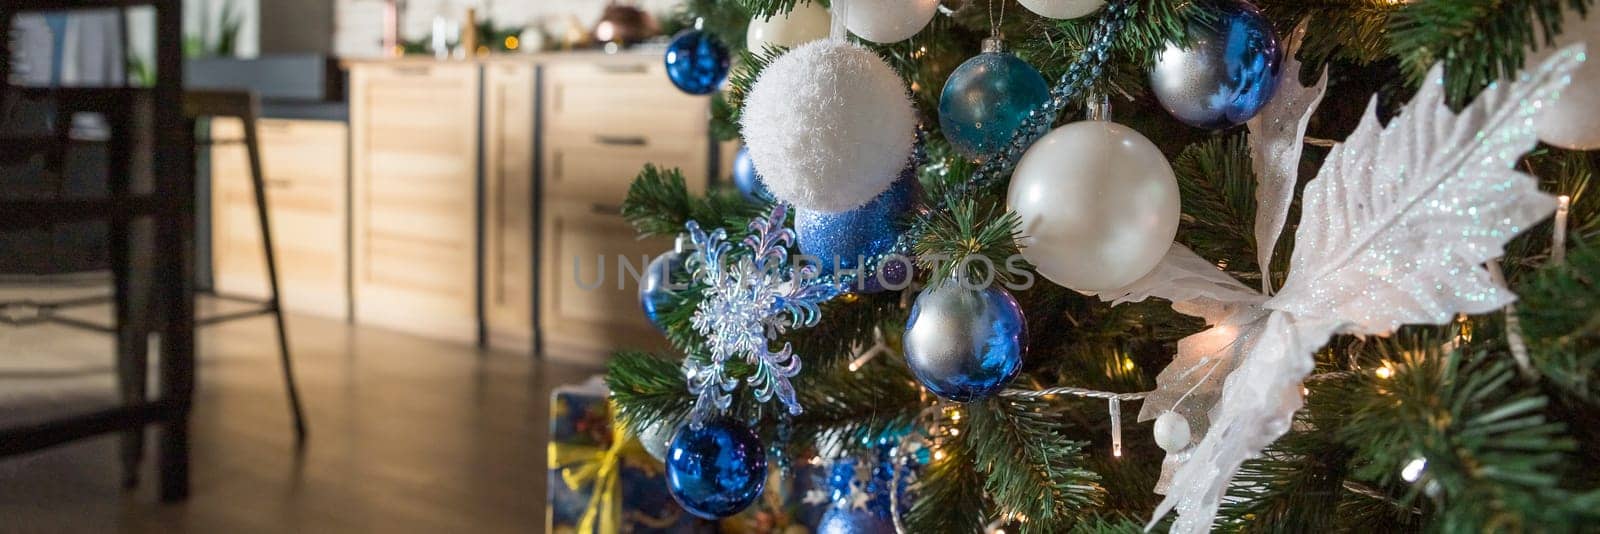 Christmas tree with blue and white toys in the interior,